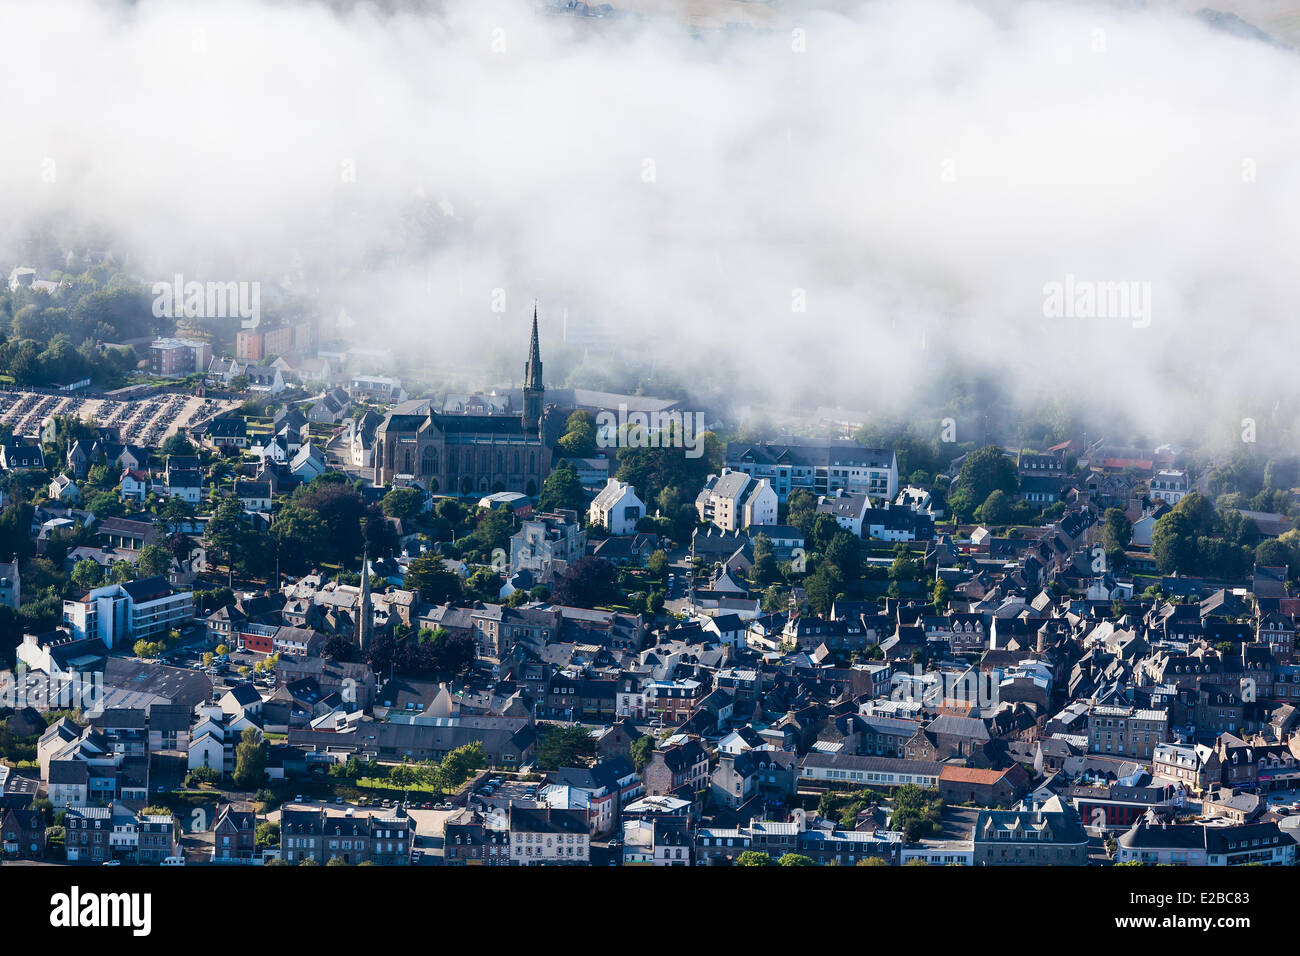 France, Cotes d'Armor, Paimpol, sea mist over the city (aerial view) Stock Photo